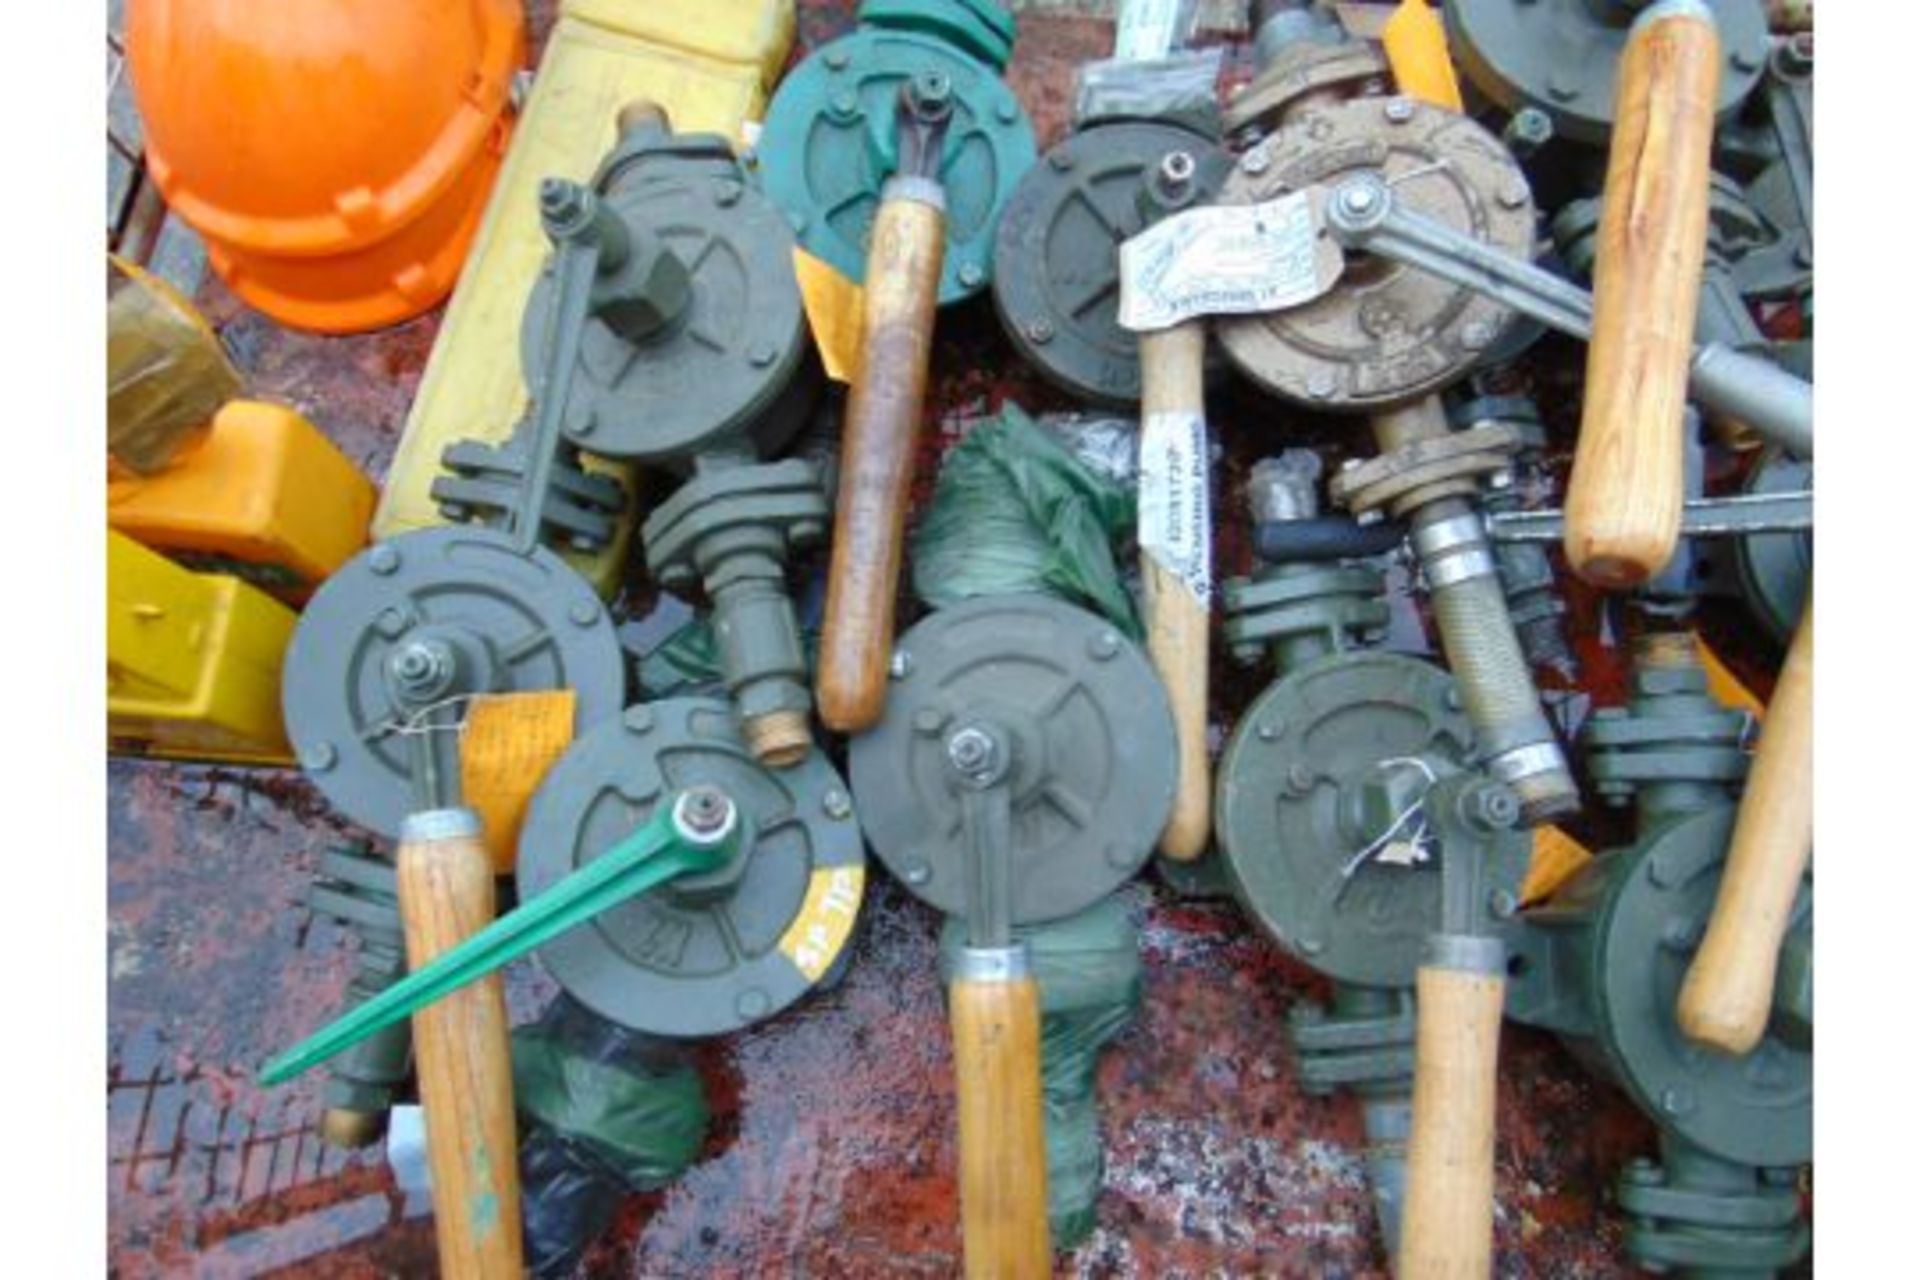 A1 Condition 14x Rotary Pumps, Hard Hats, etc - Image 2 of 4